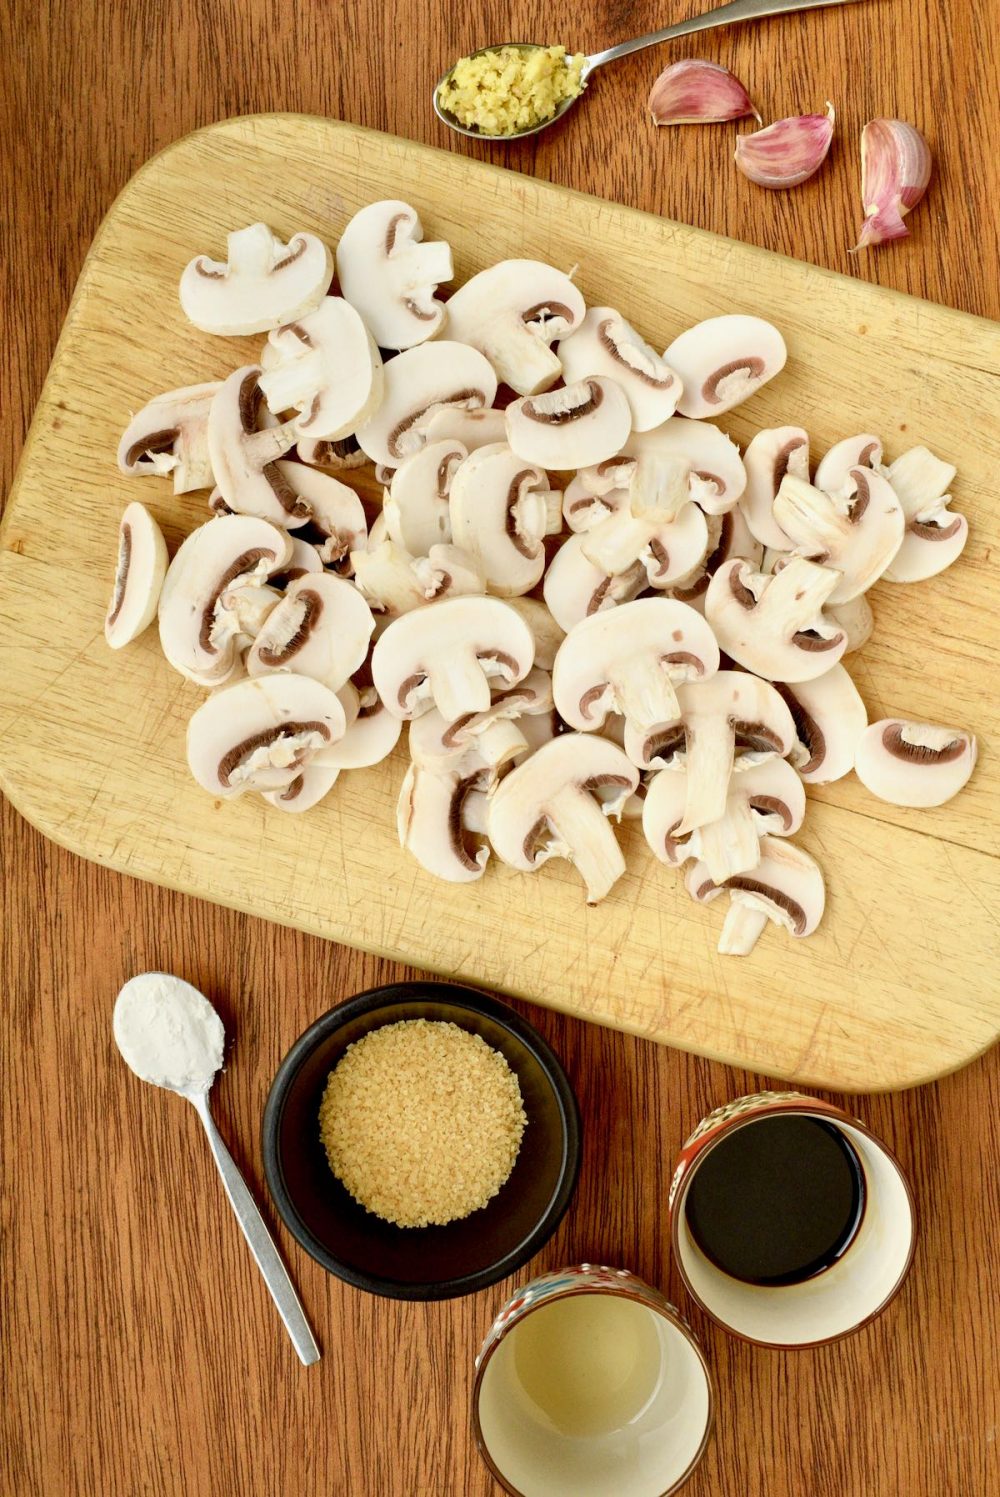 Sliced white mushrooms on a board next to ingredients for teriyaki sauce